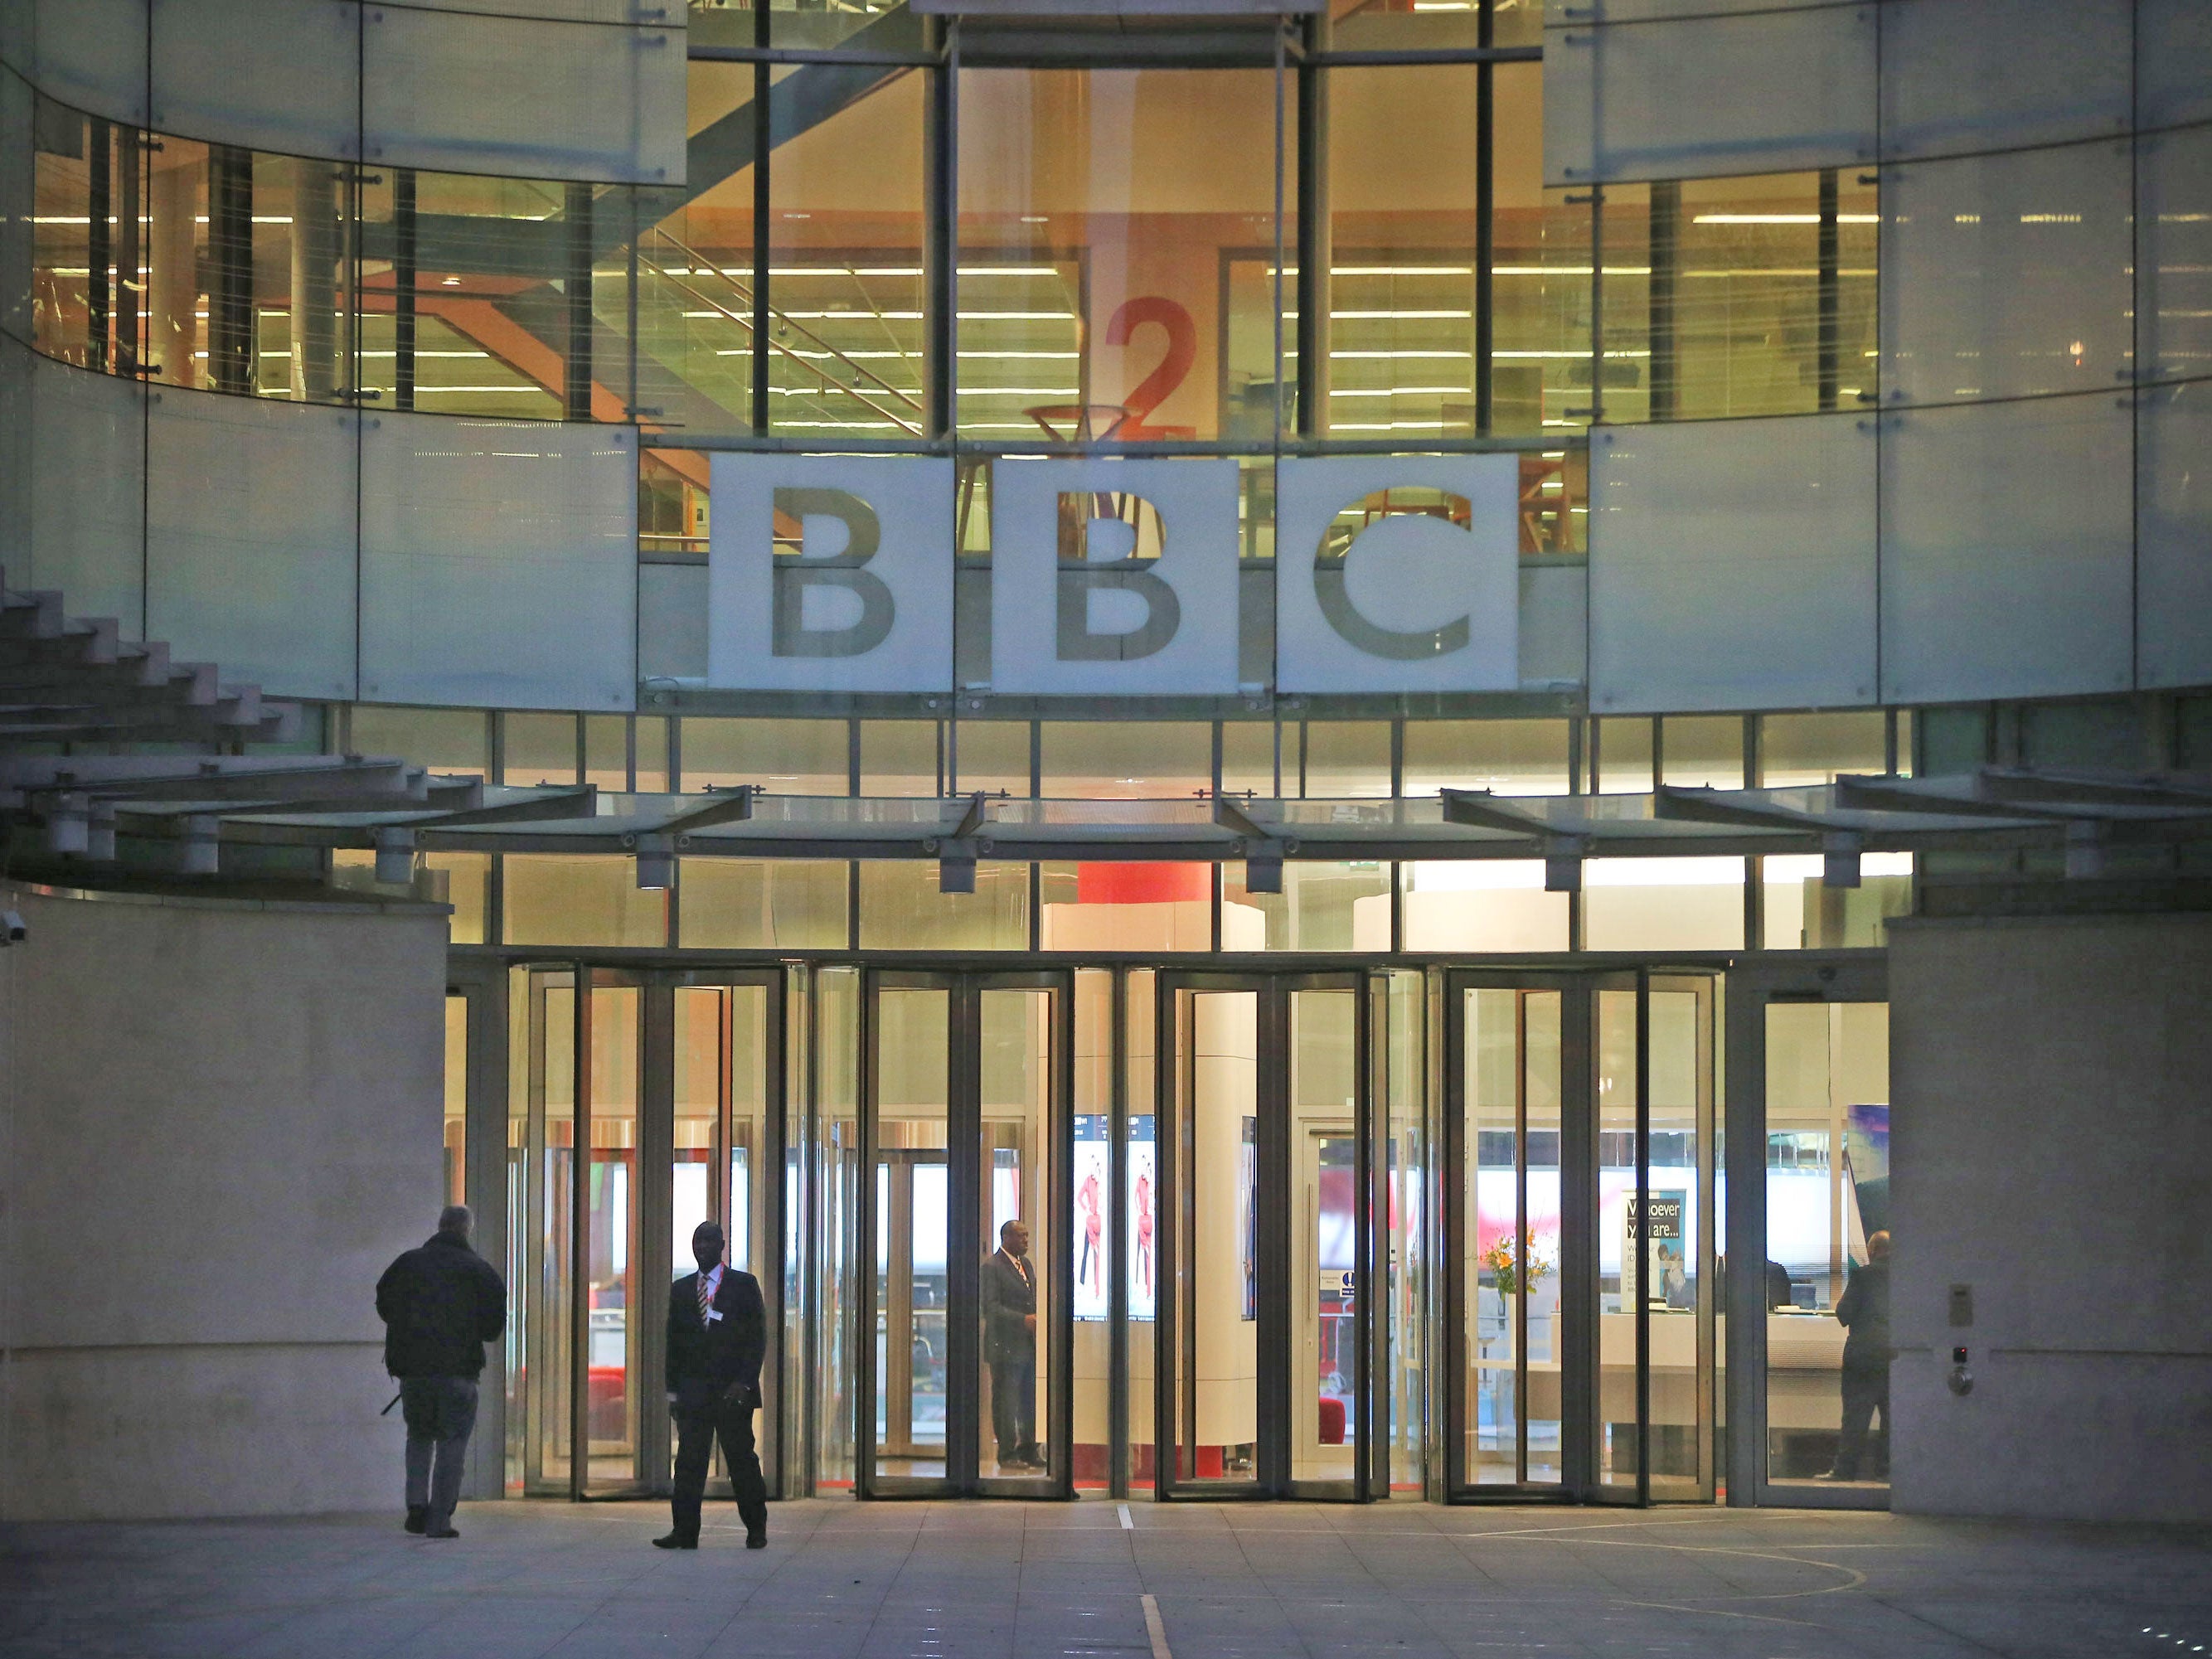 The BBC updated its election guidelines to staff as campaigning began. “You shouldn't state your political preferences or say anything that compromises your impartiality", it said.